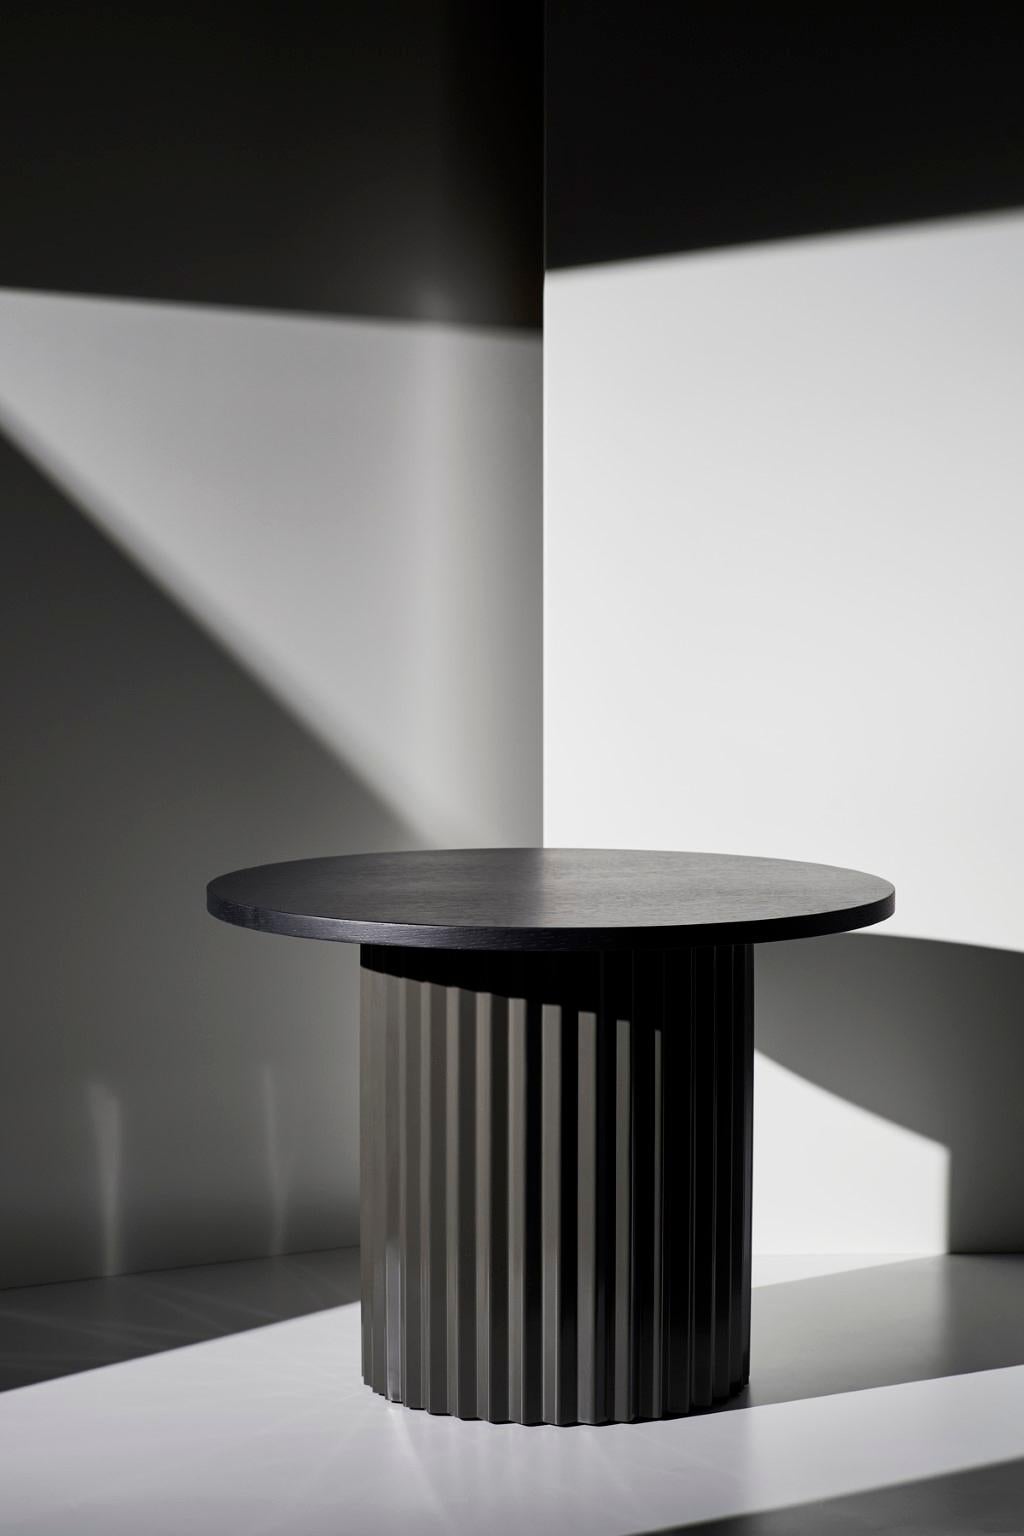 Set of 2 marble tables by Lisette Rützou
Dimensions:
D 60 x H 41 cm
D 40 x H 41 cm
Materials: oak tabletop, brass column


 Lisette Rützou’s design is motivated by an urge to articulate a story. Inspired by the beauty of materials, form and